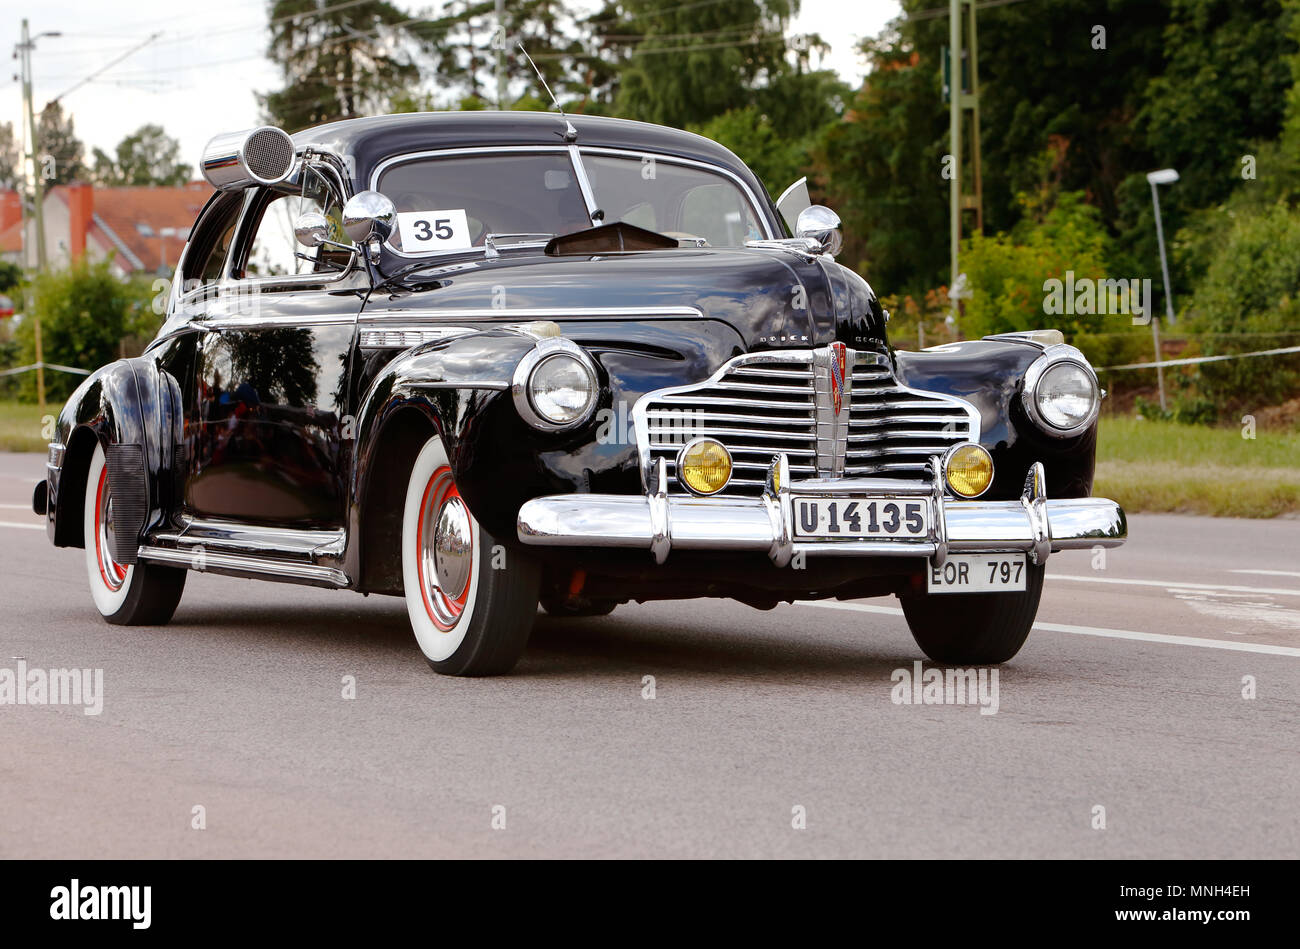 Vasteras, Sweden - July 5, 2013: One black Buick Sedanette 1941 during cruising parade at the Power Big Meet event Stock Photo